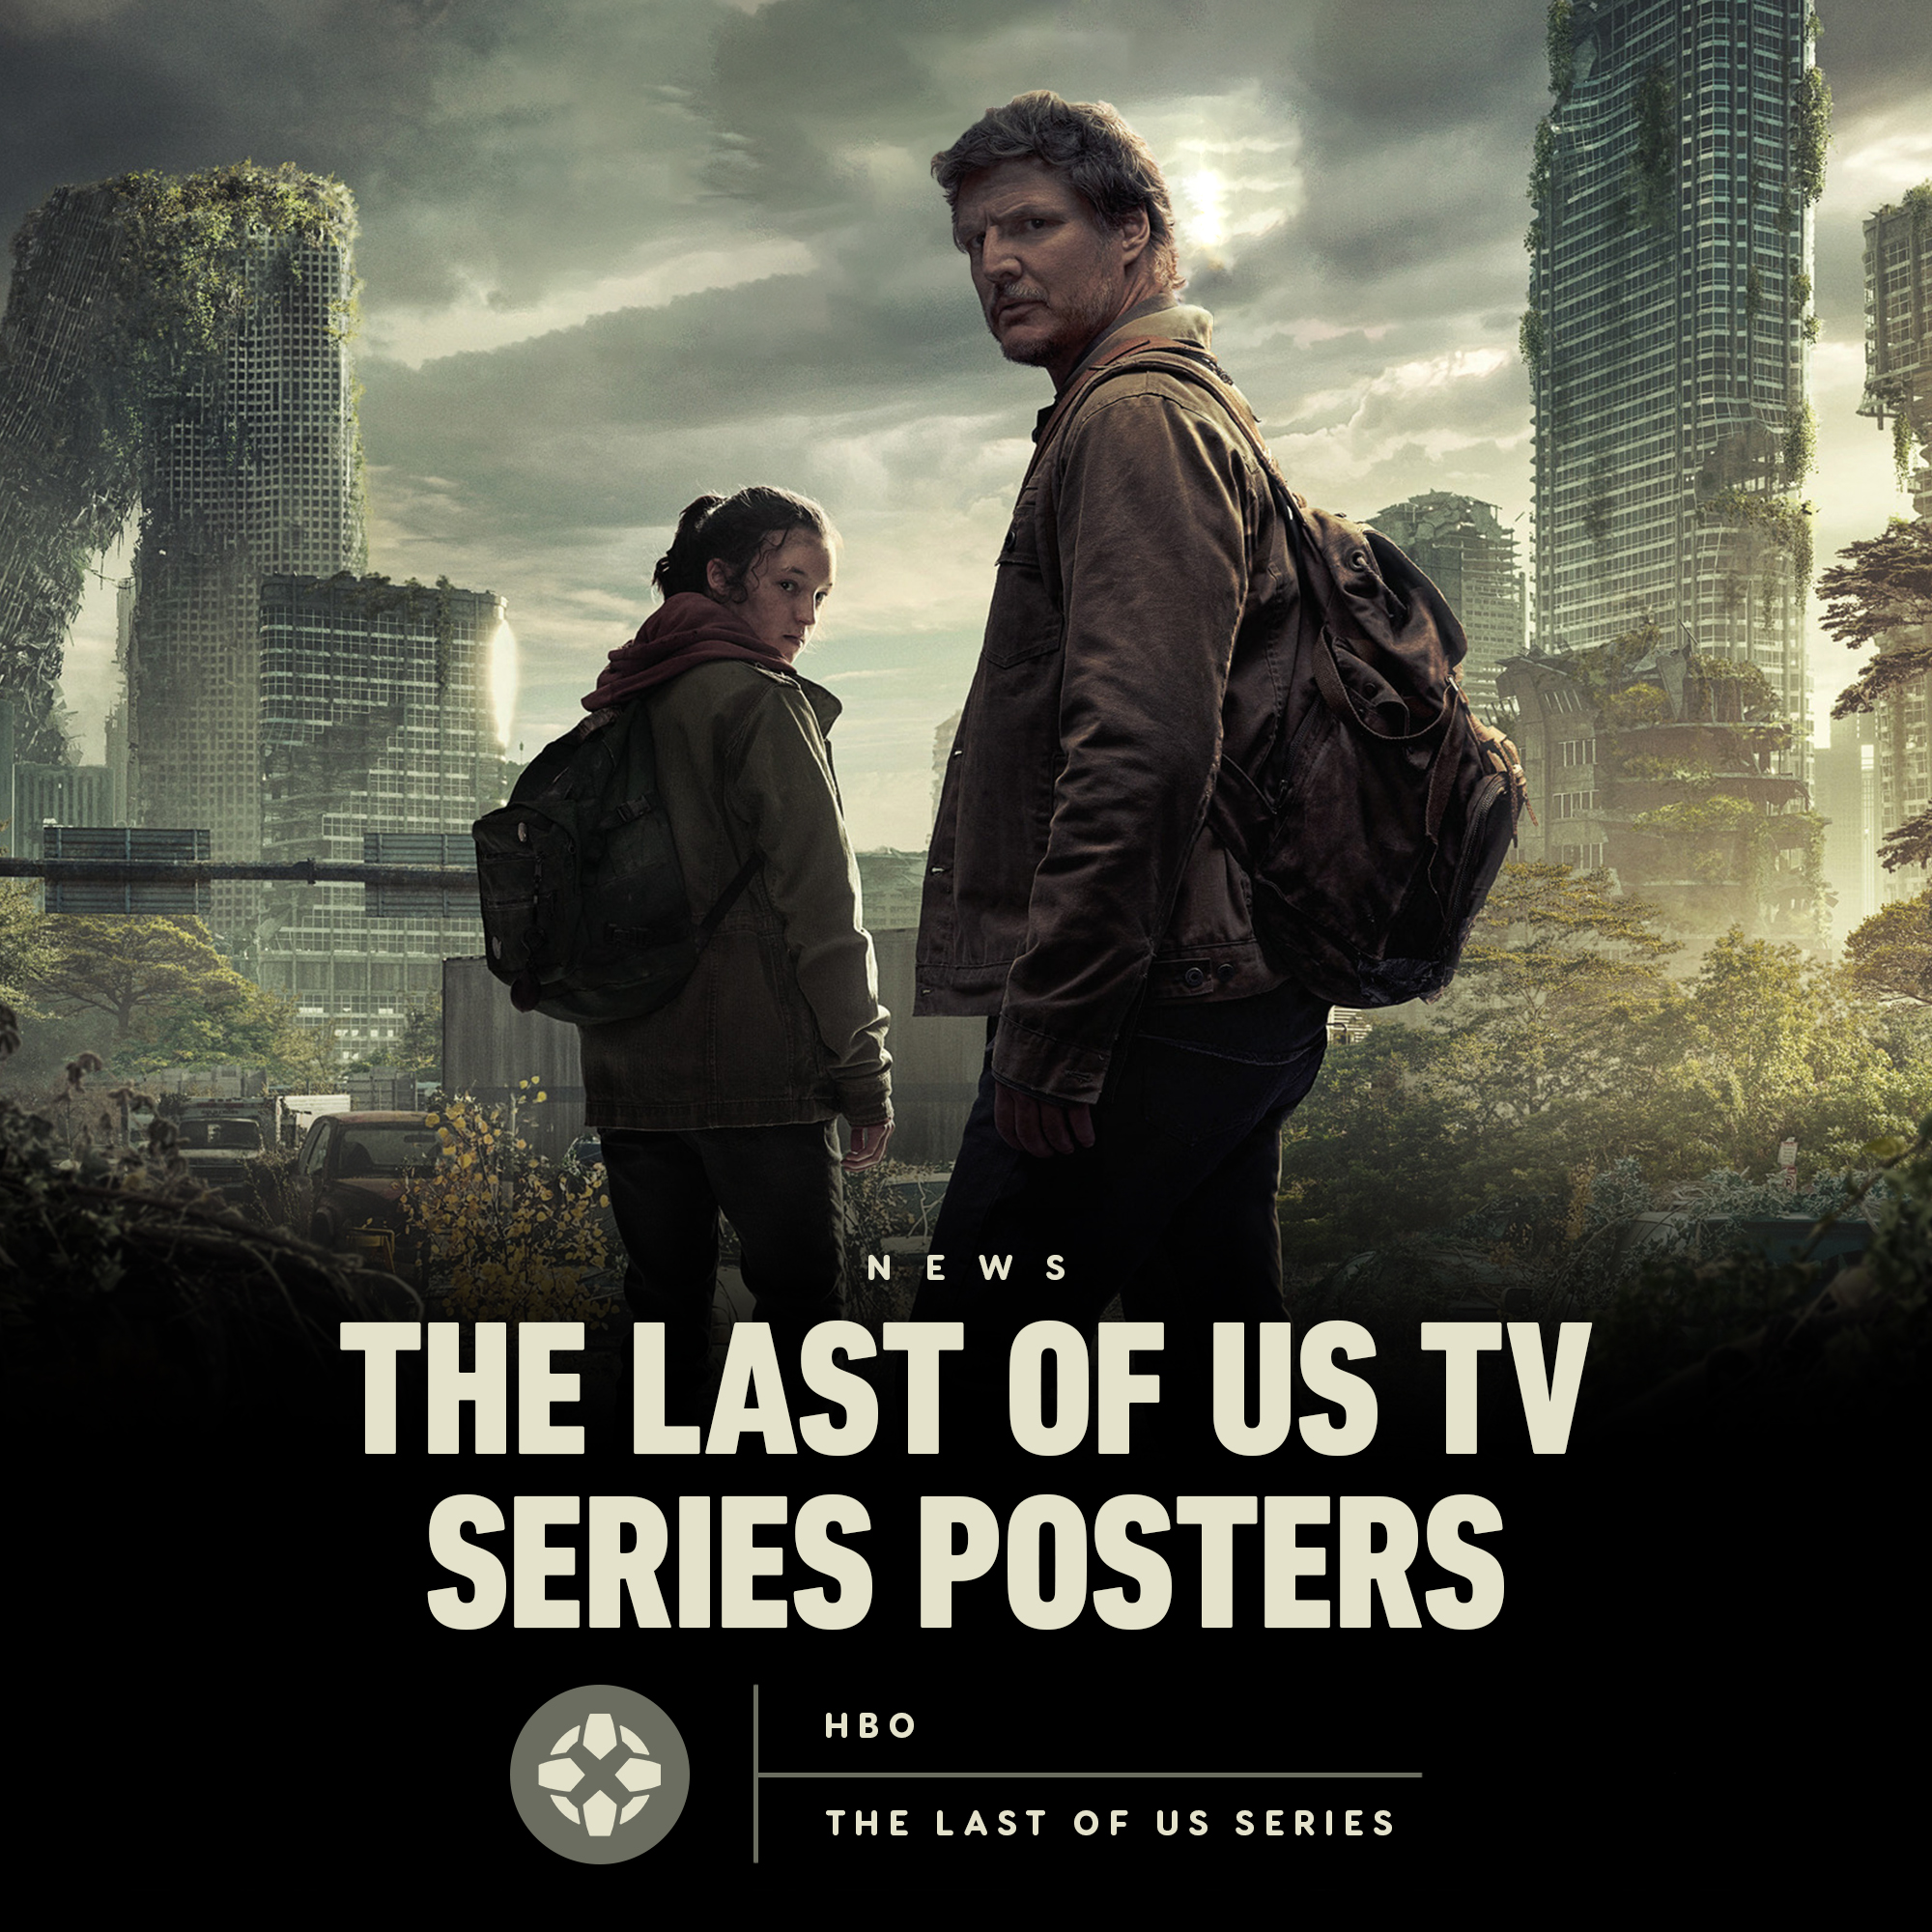 The Last of Us HBO Character Posters Feature Joel, Ellie, Bill, and More -  IGN